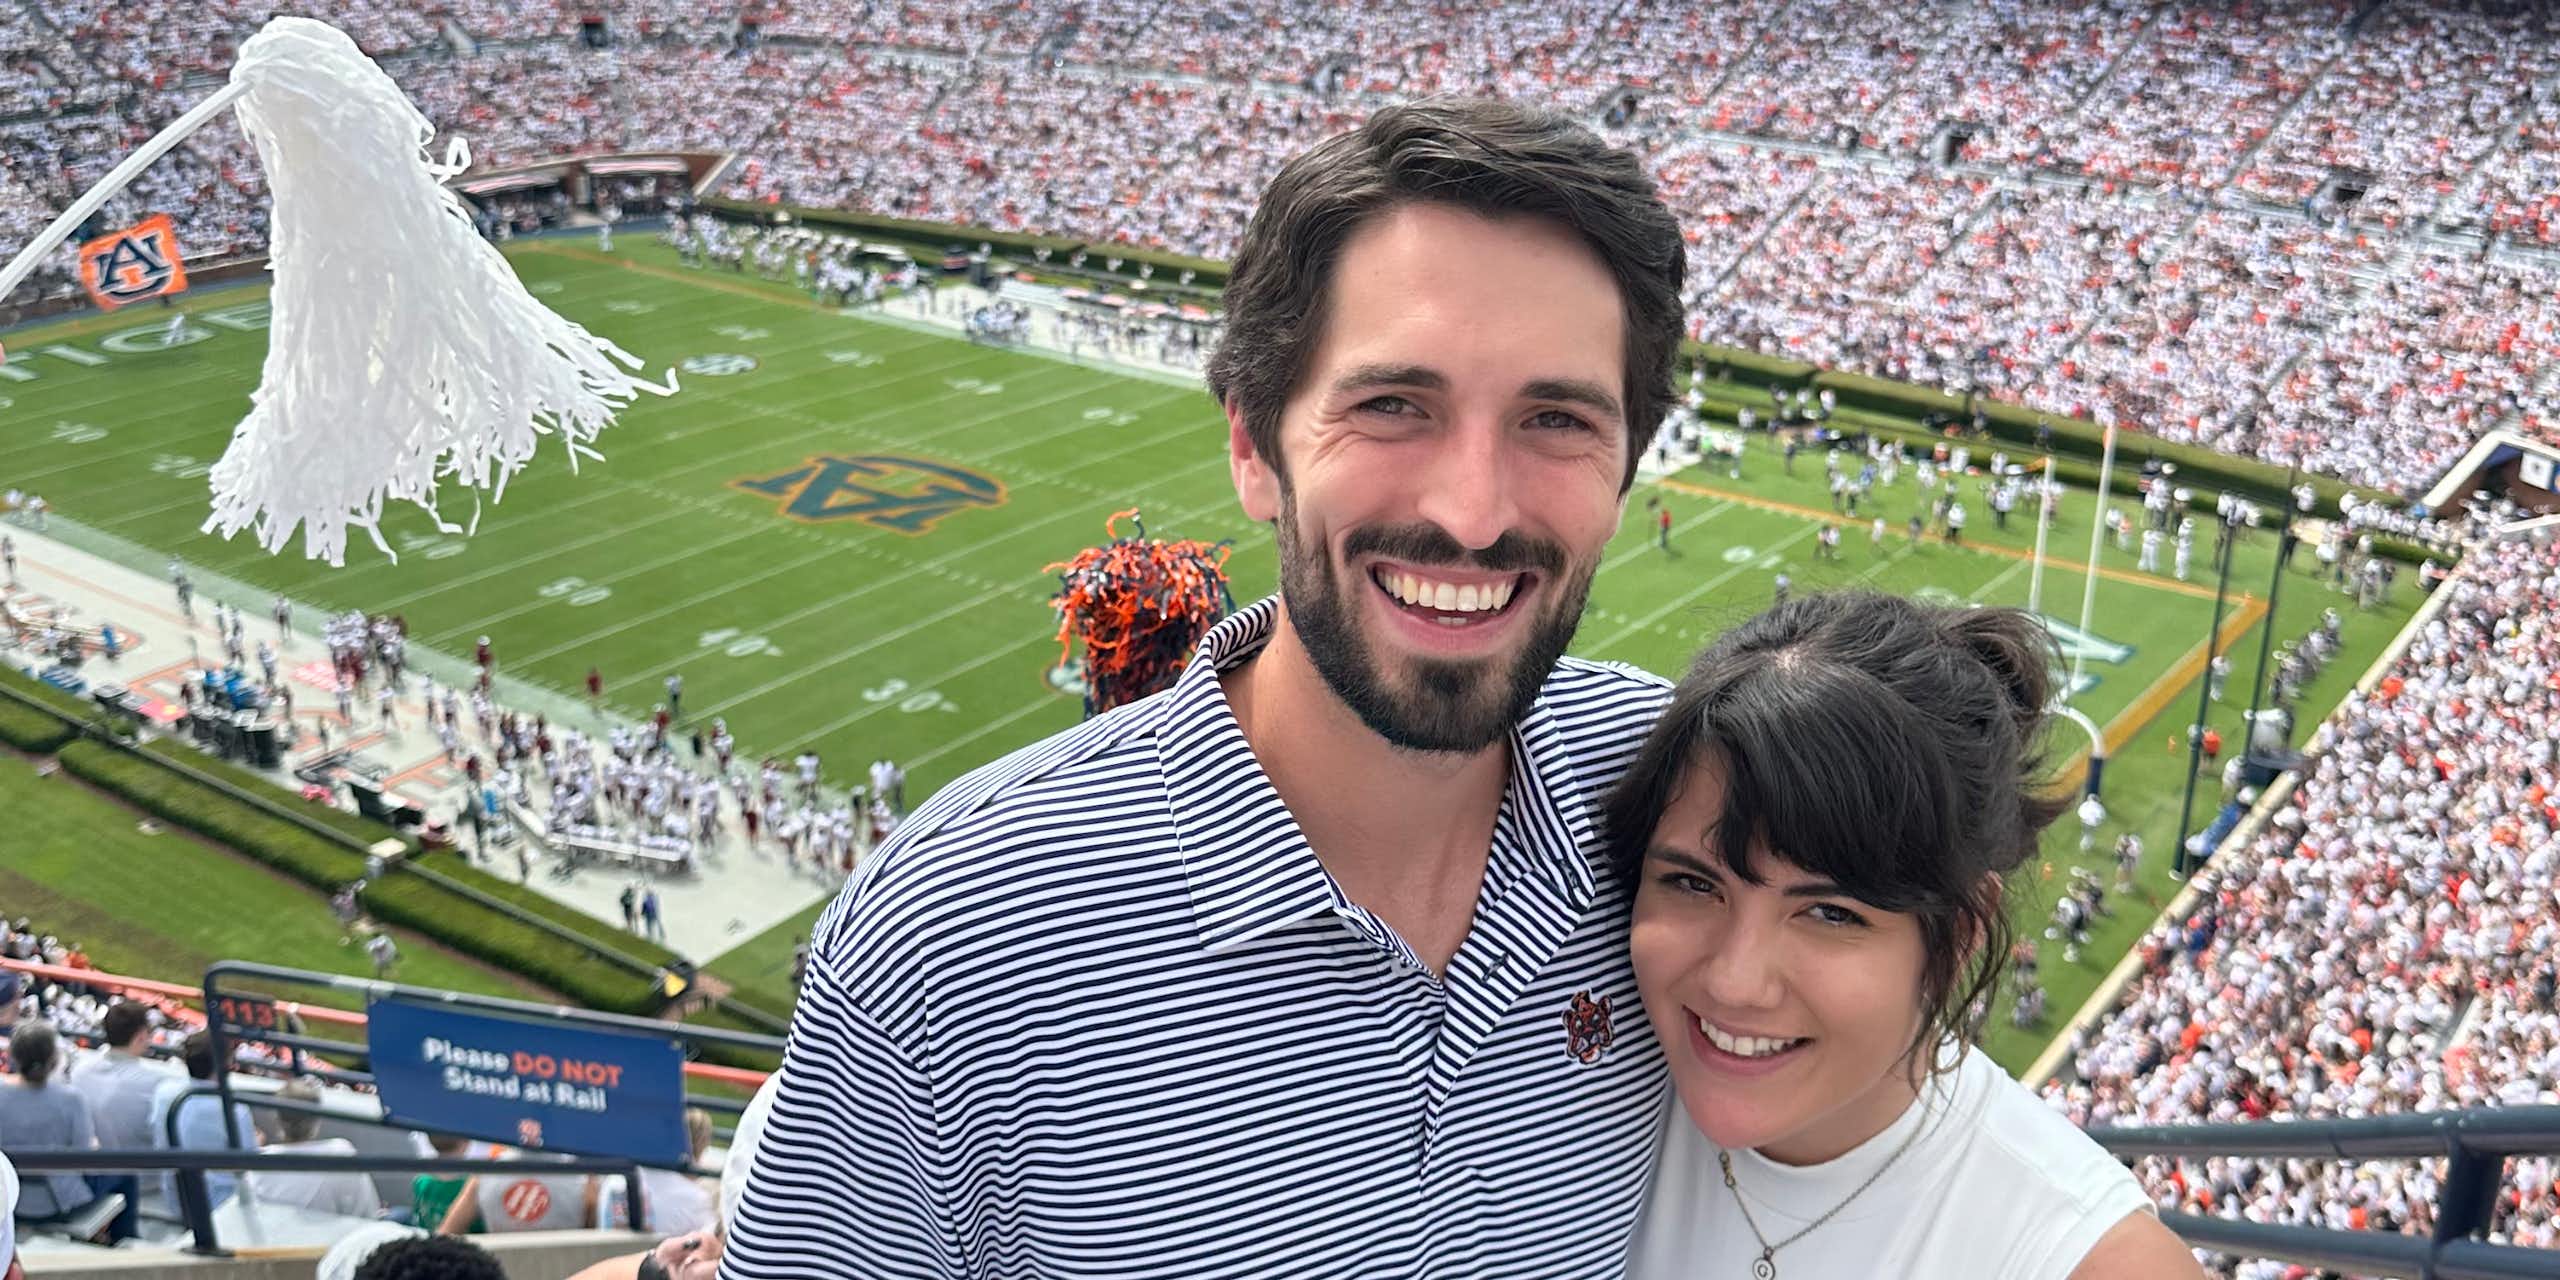 A smiling couple with a football stadium in the background.